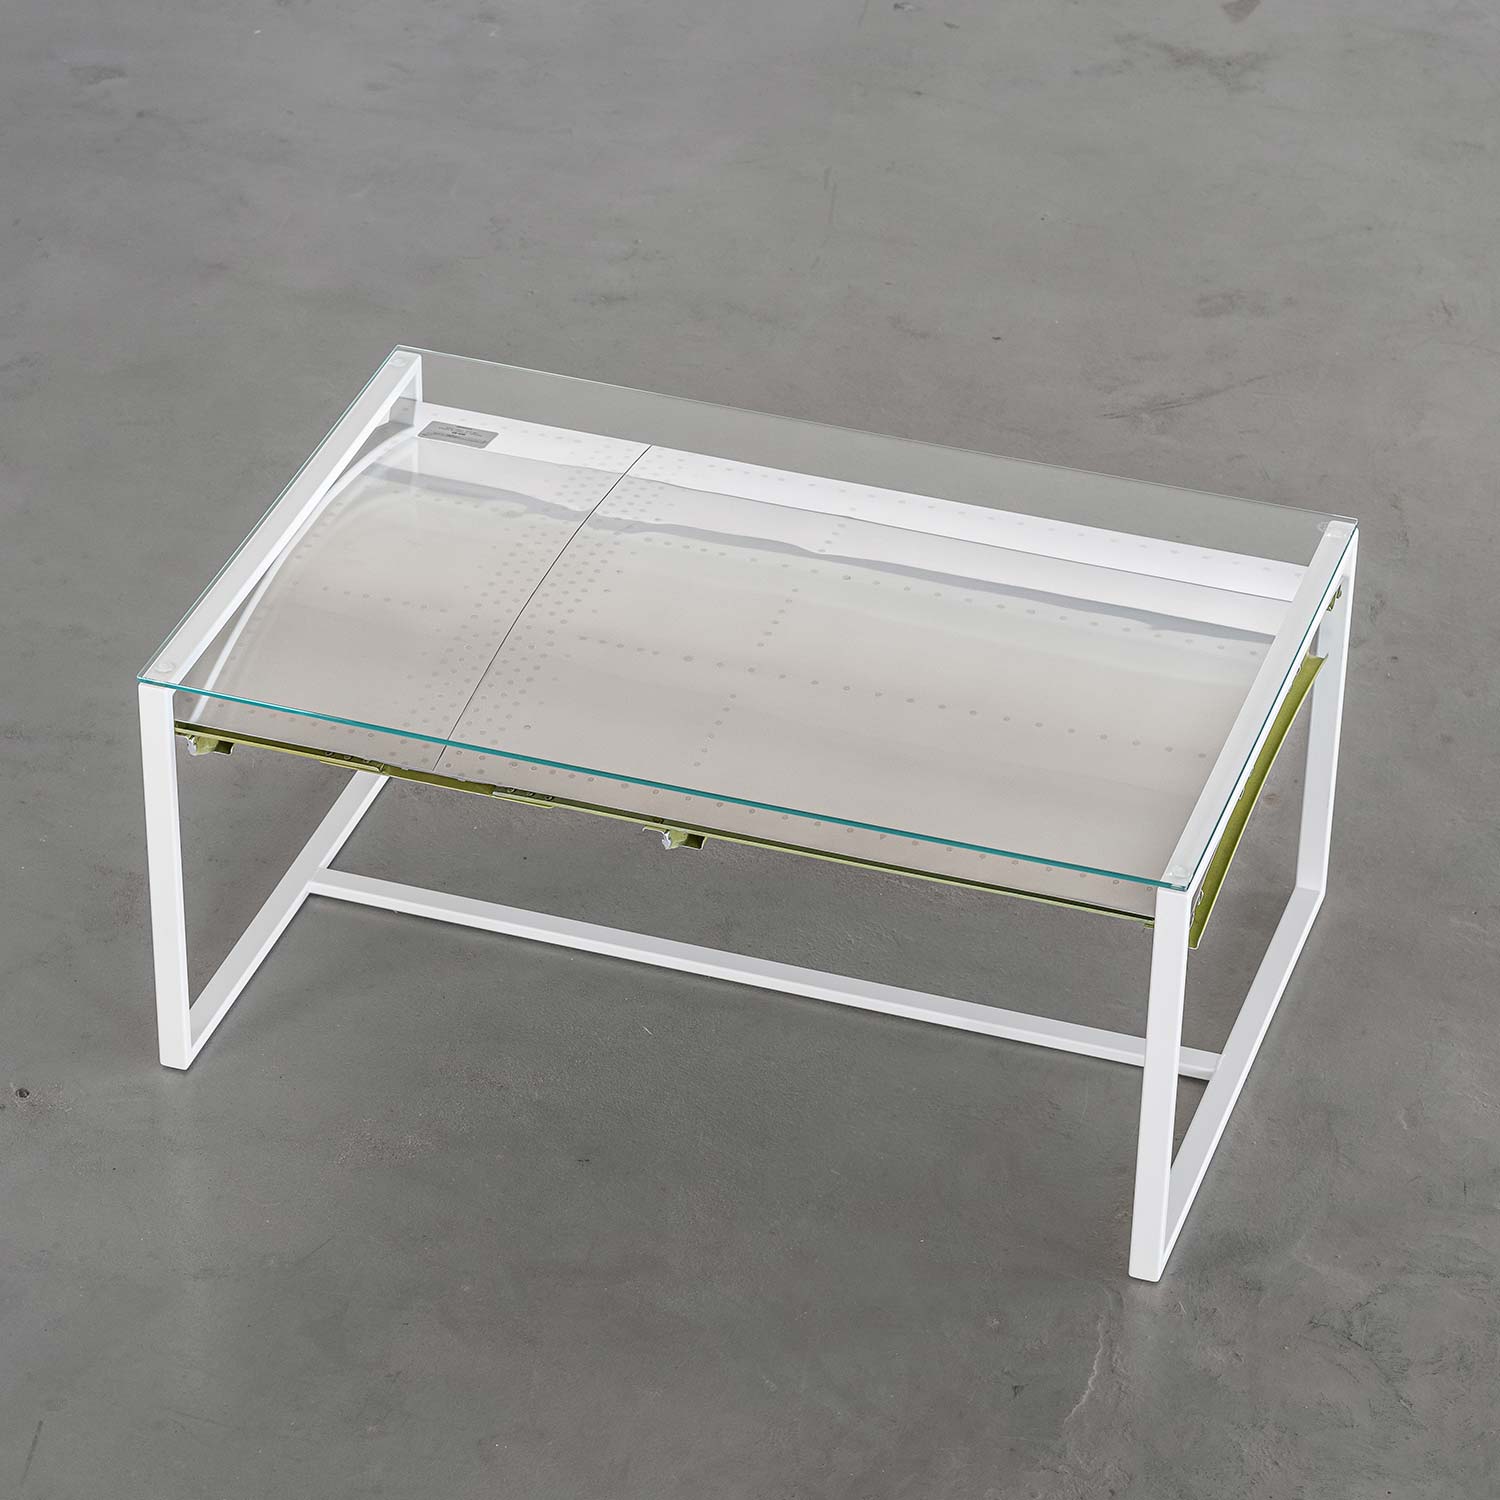 Coffee Table from Aircraft Parts with Glass Top McDonnell Douglas MD-80, High-Gloss Polished, Frame: White, approx. 102,5  x 54 cm